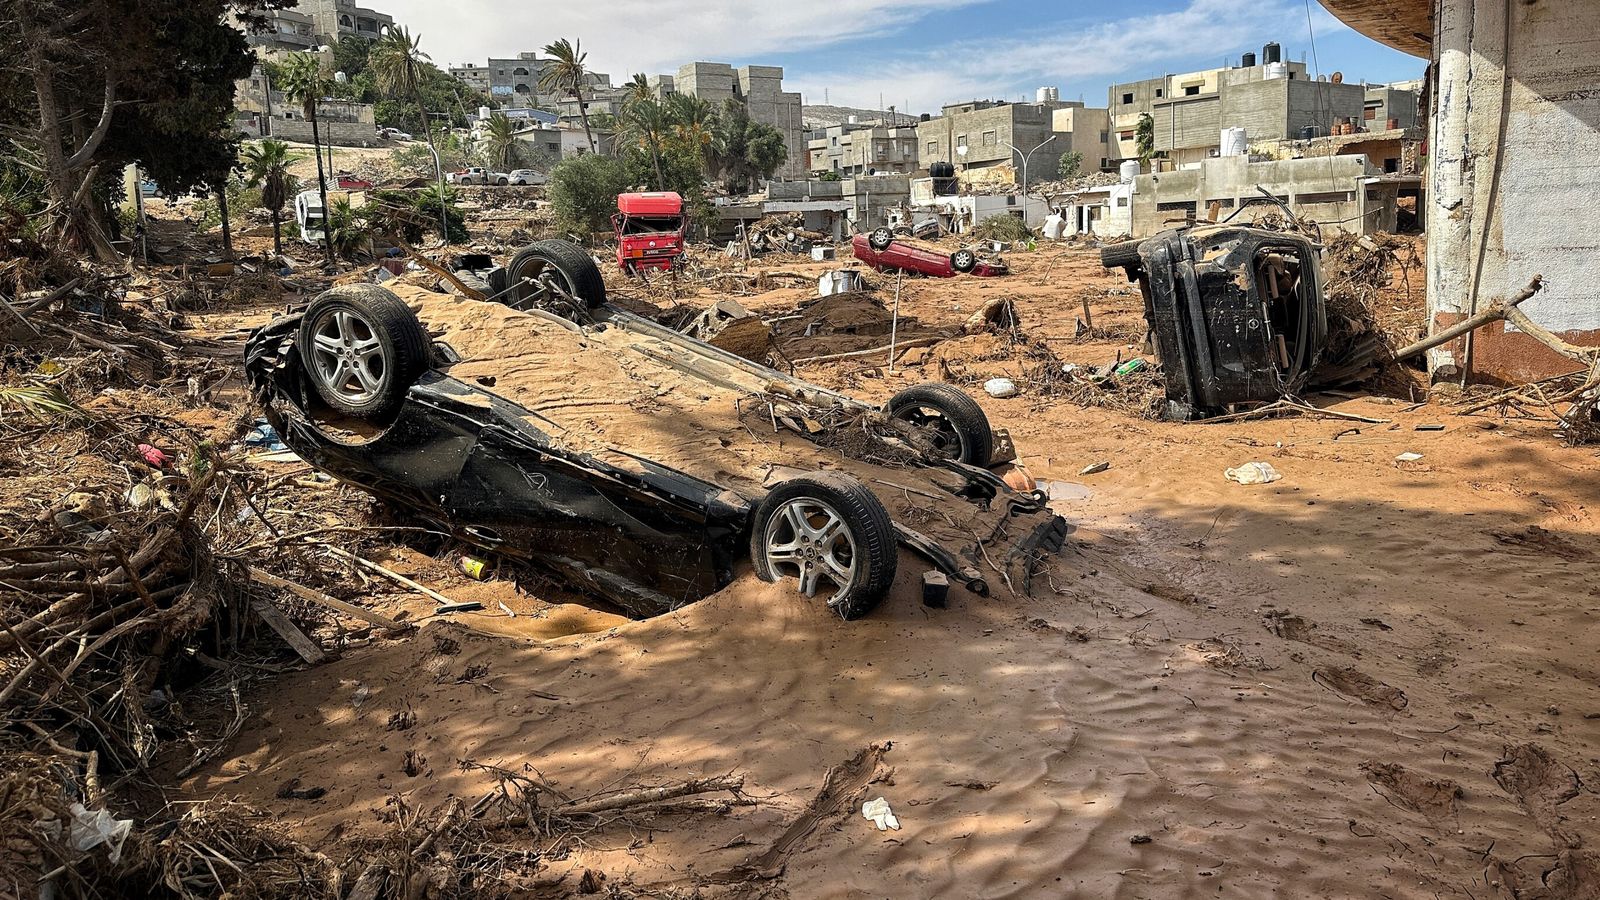 ‘Frenzied, chaotic mess’: Fears grow over spread of disease after deadly Libya floods